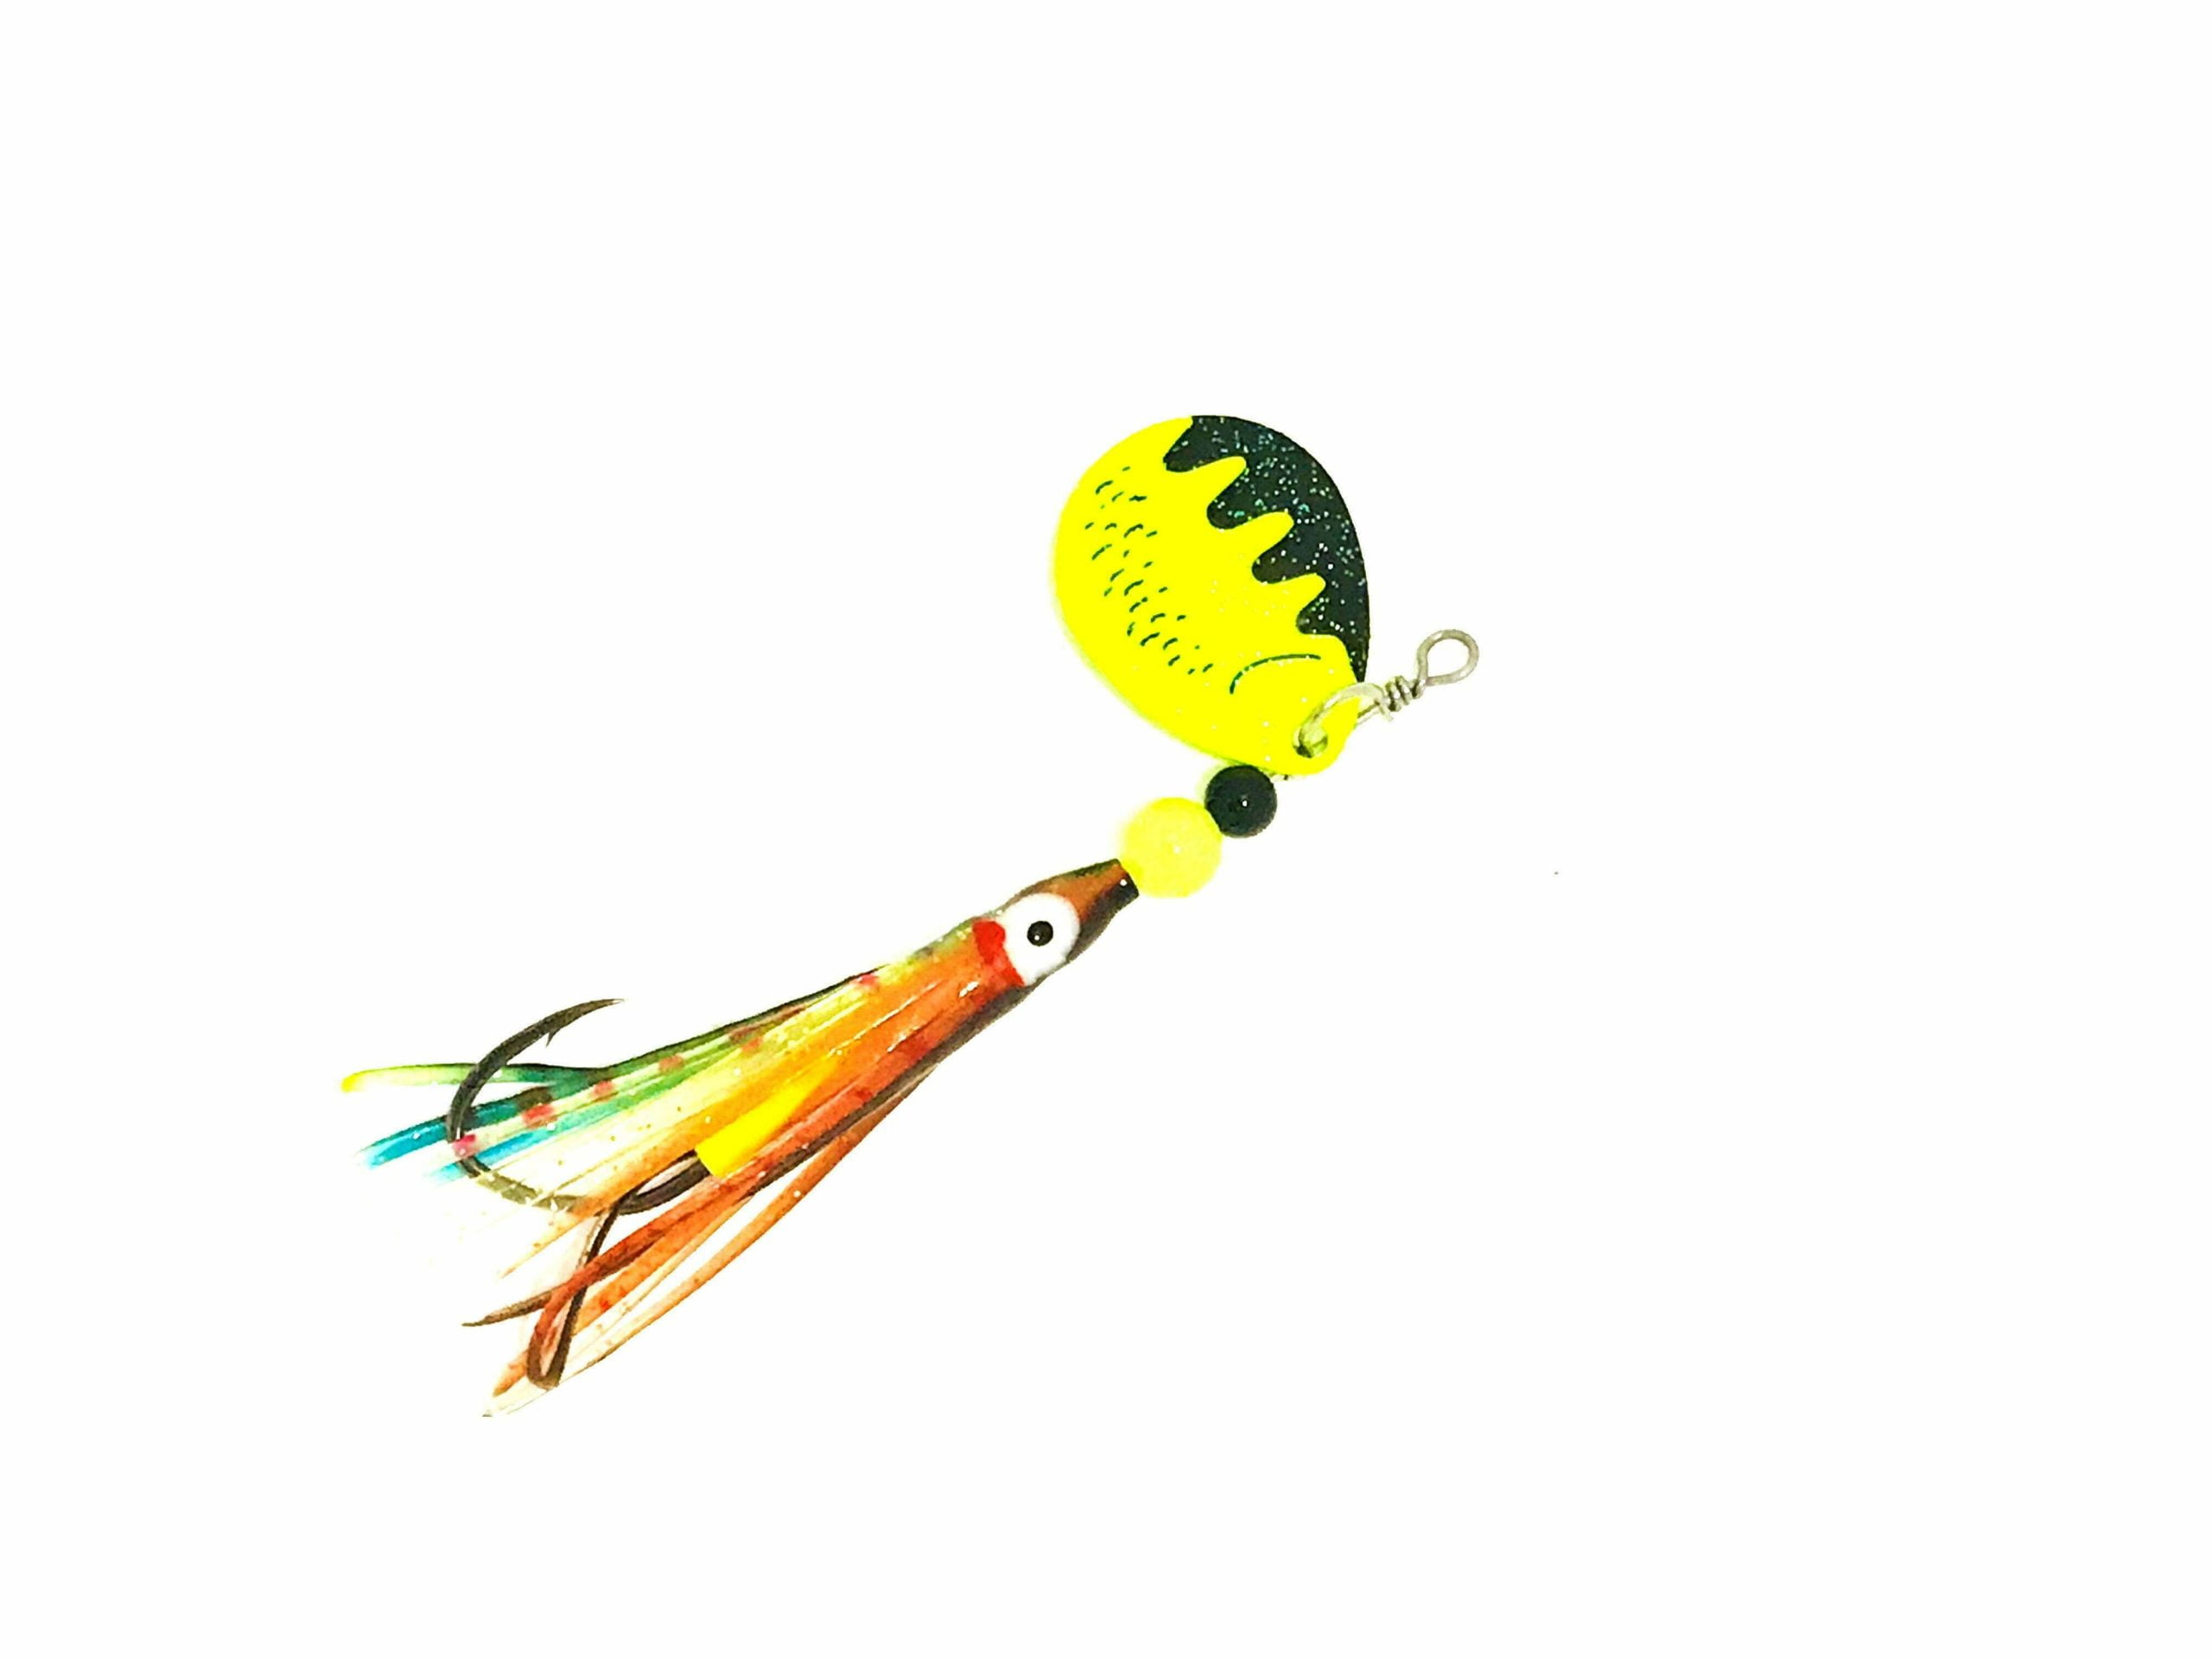 3.5 Colorado UV Pink Glow” Dirty Troll Trolling Spinner By SCB - Stone  Cold Fishing Beads